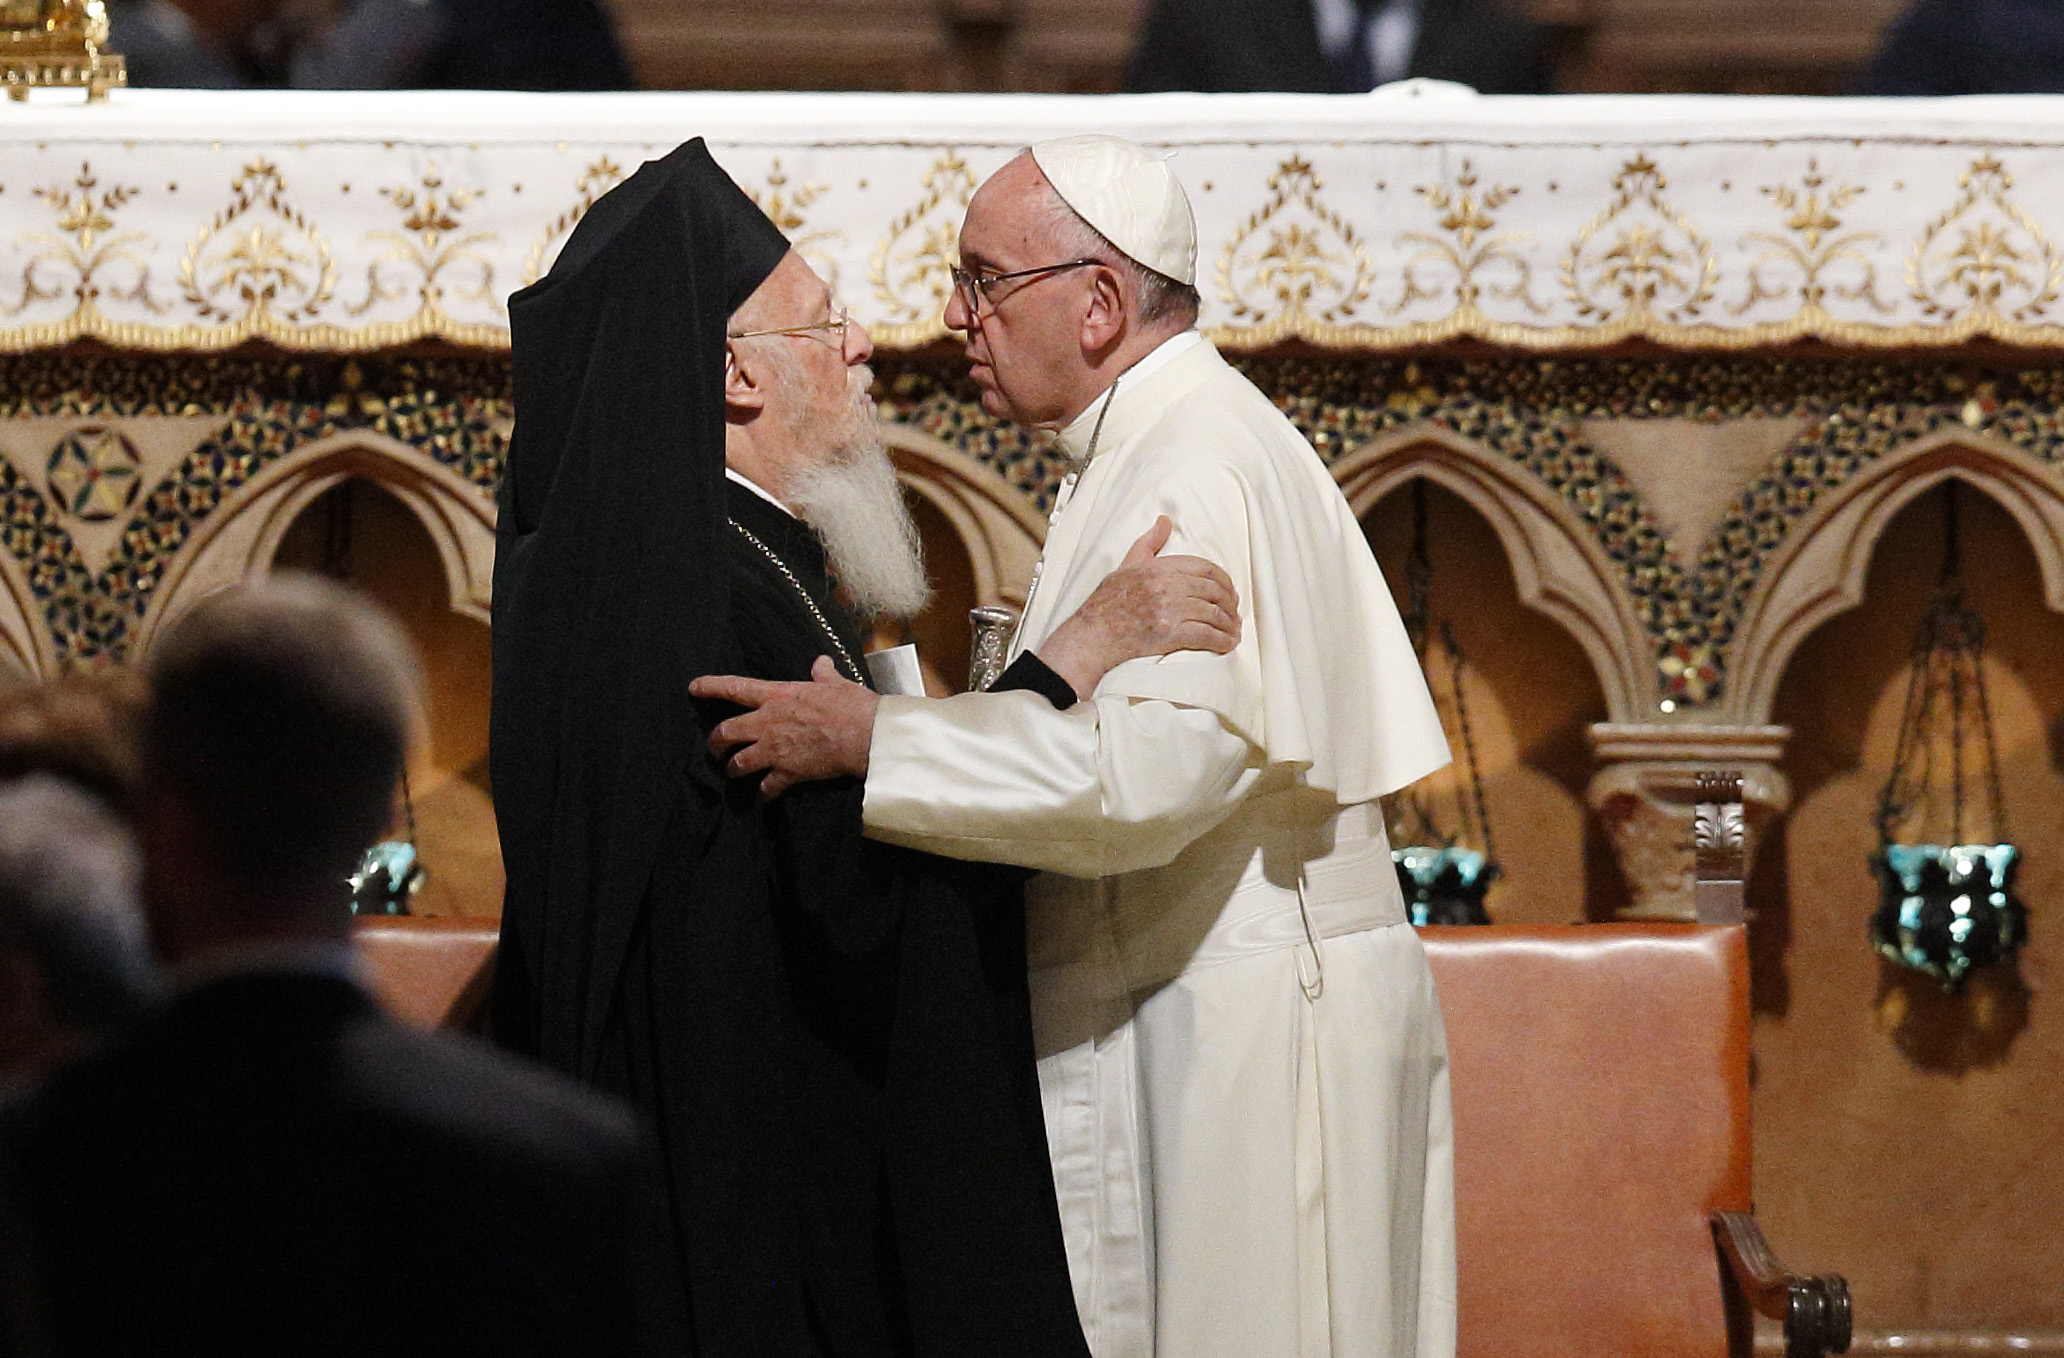 Pope Francis embraces Ecumenical Patriarch Bartholomew of Constantinople during an ecumenical prayer service with religious leaders in the Basilica of St. Francis in Assisi, Italy, Sept. 20. (CNS photo/Paul Haring)